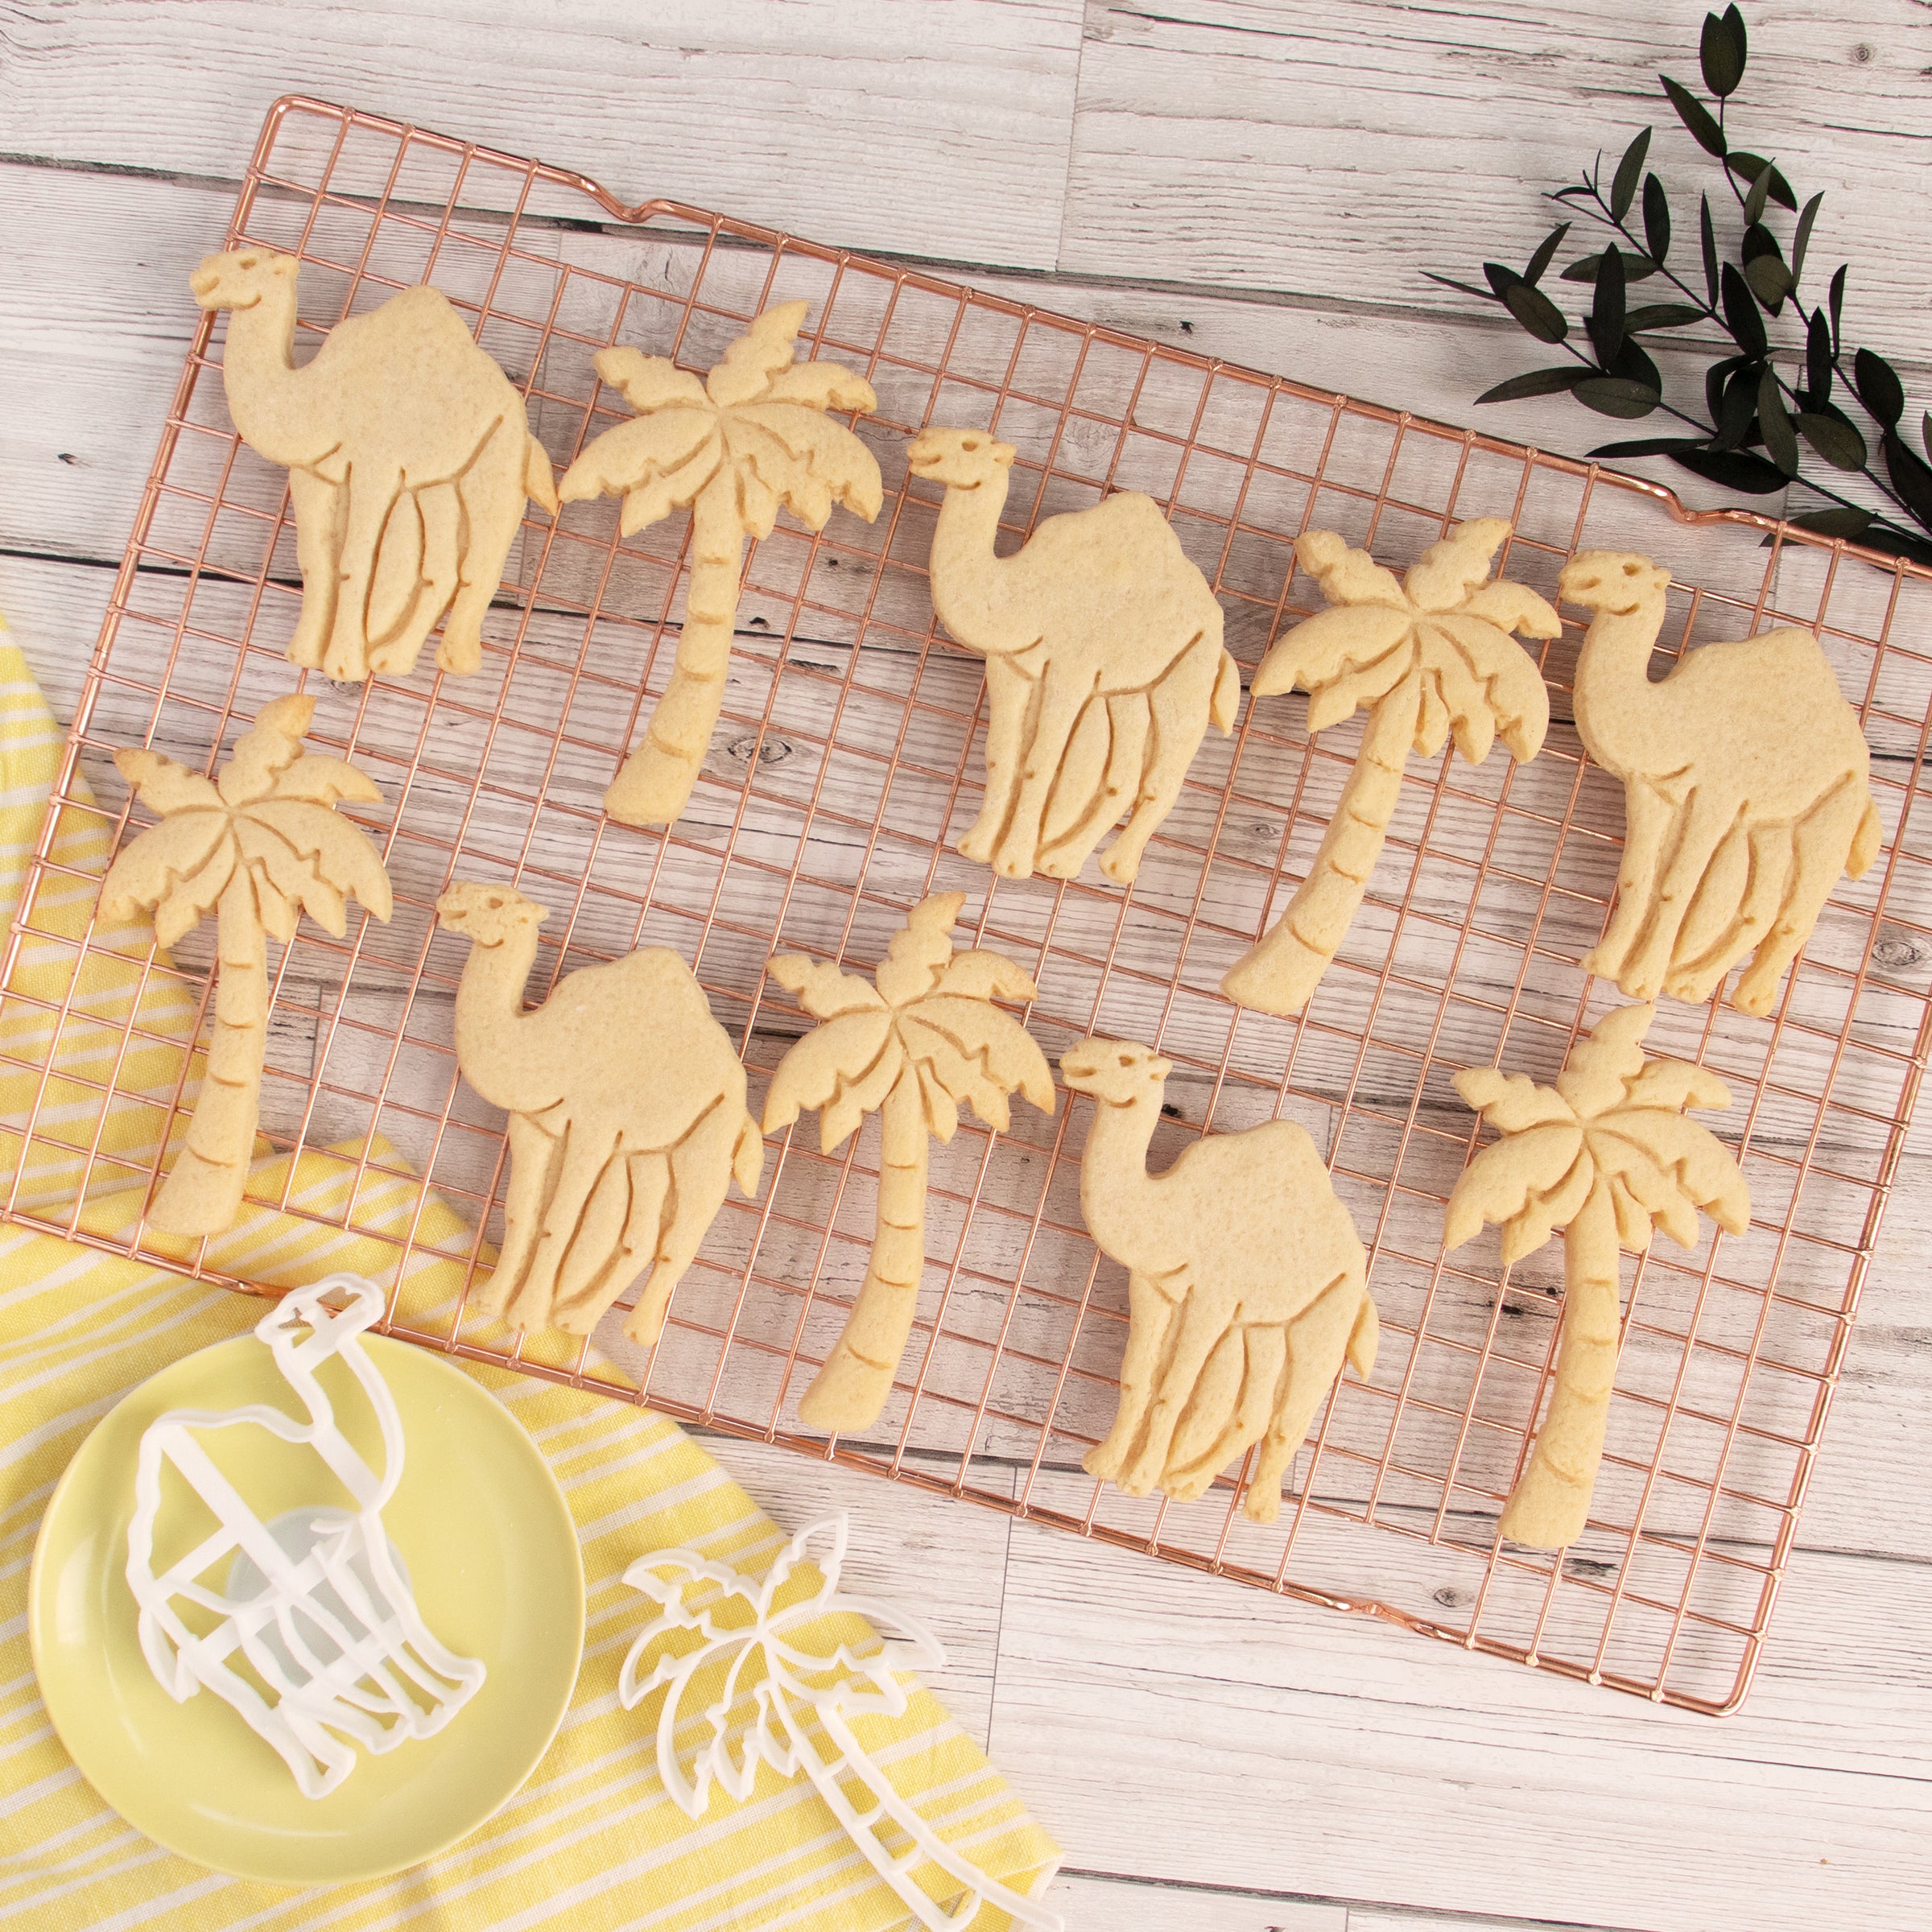 camel and palm tree cookies